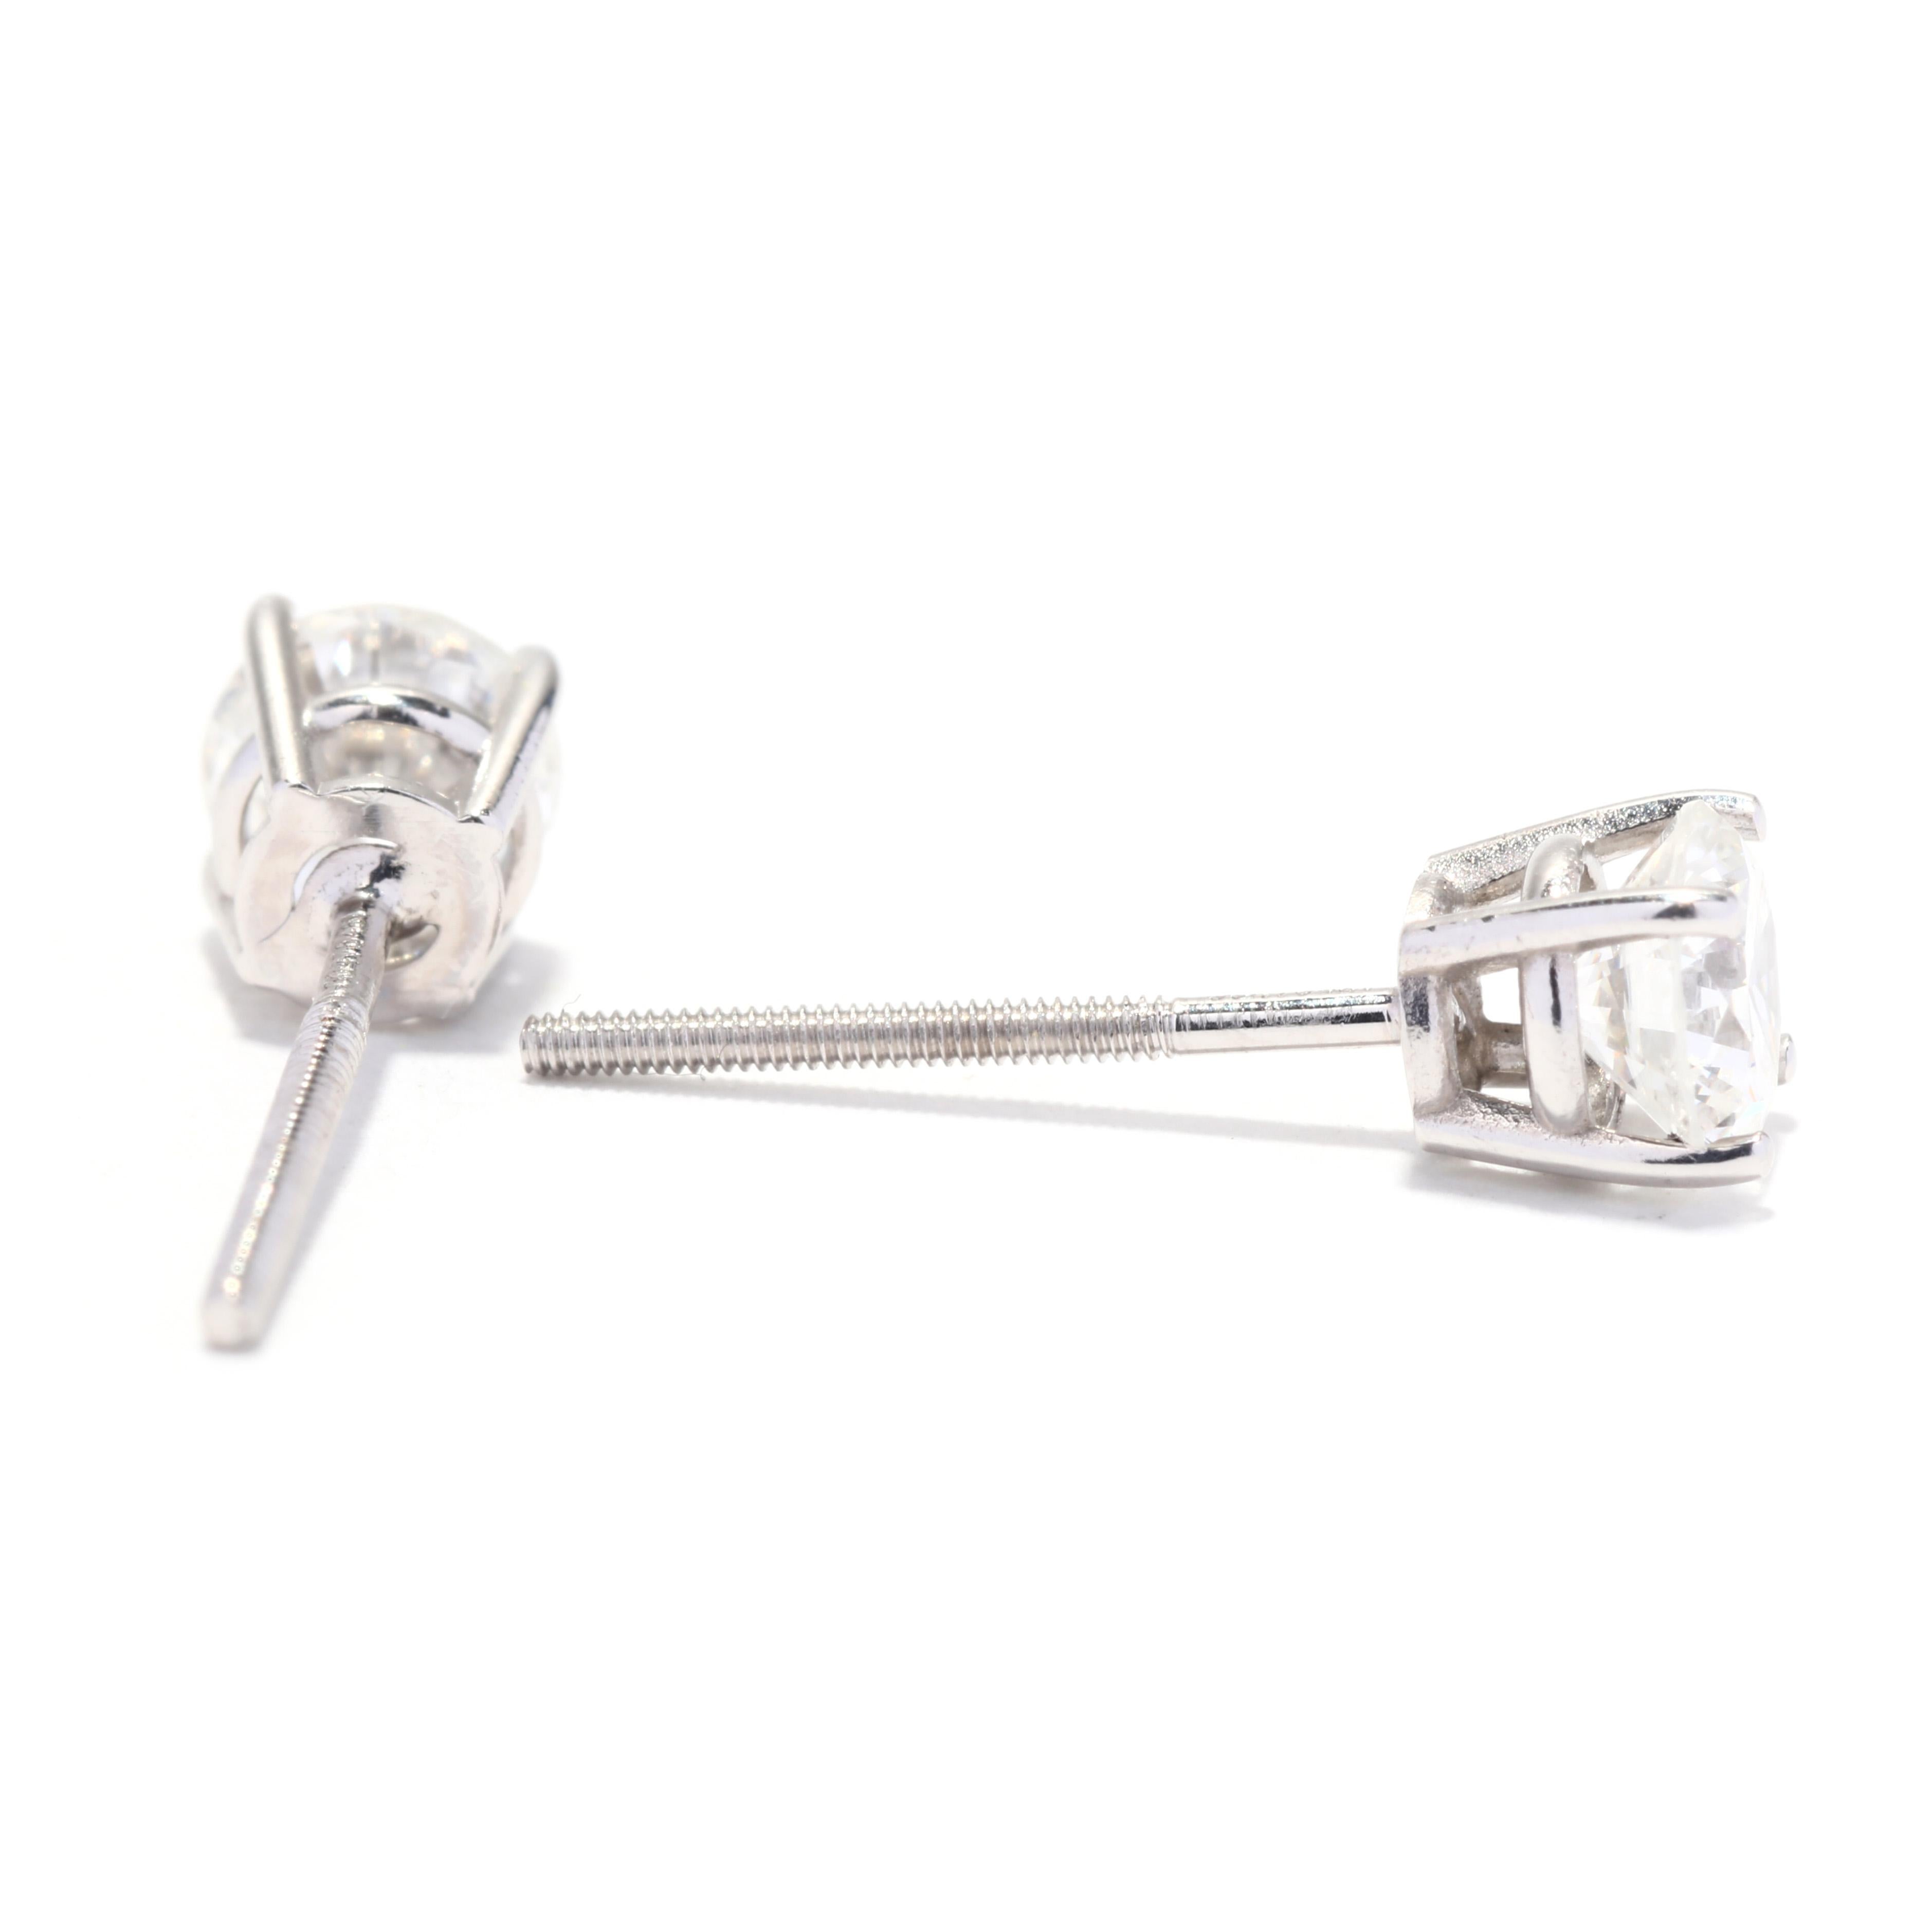 A pair of platinum diamond stud earrings. This simple diamond stud earrings feature prong set, round brilliant cut diamonds weighing approximately .75 total carats and with pierced screw backs.

Stones:
- diamonds, 2 stones
- round brilliant cut
-